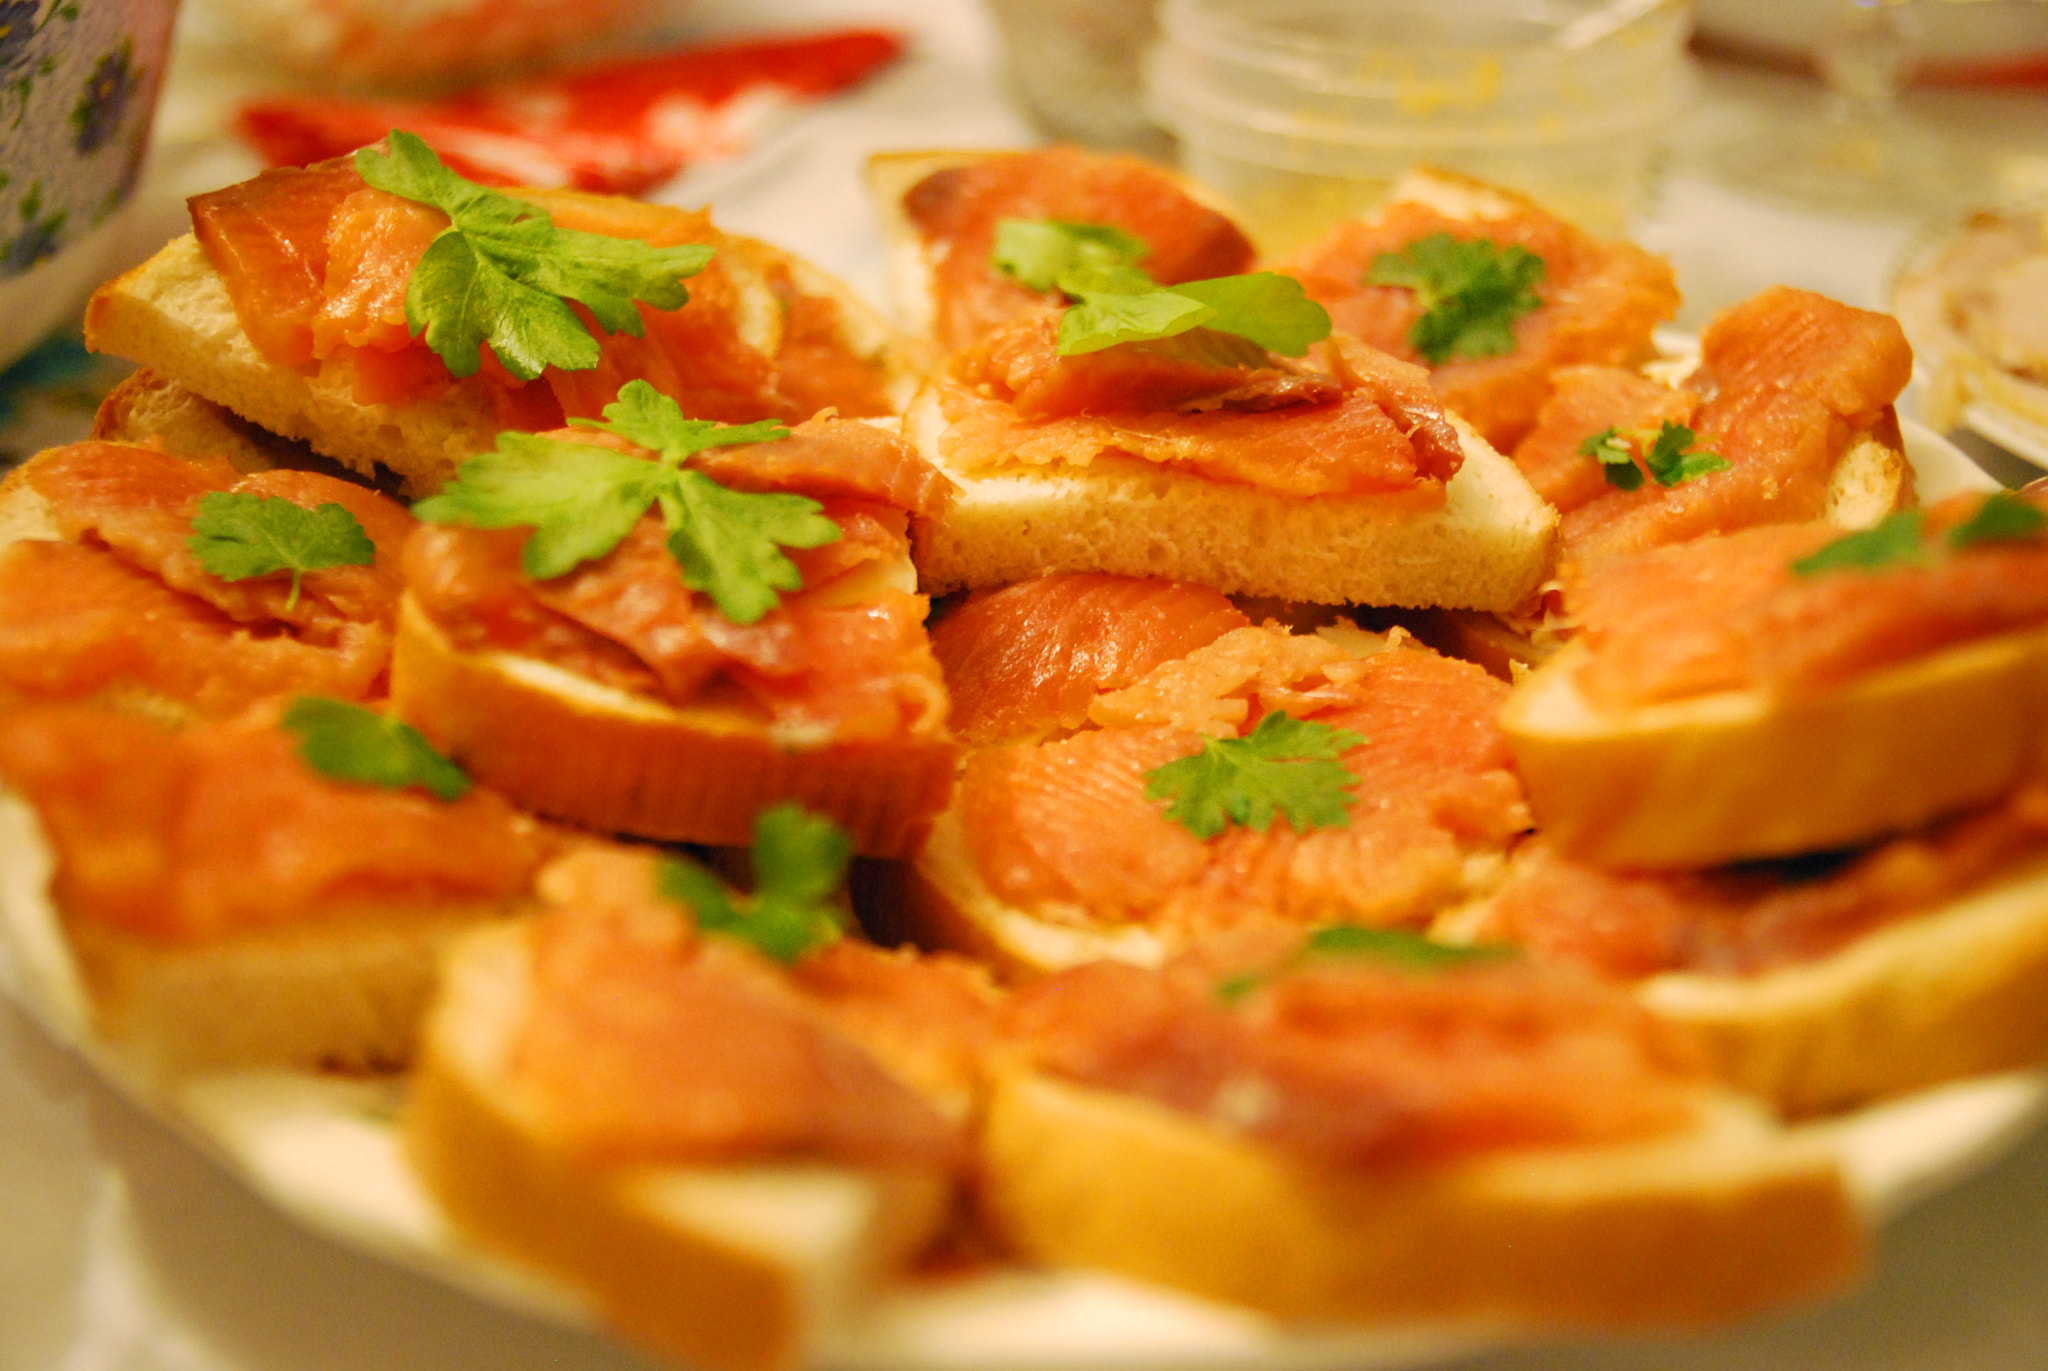 Nikon D40X sample photo. Red fish sandwich on a board, selective focus photography